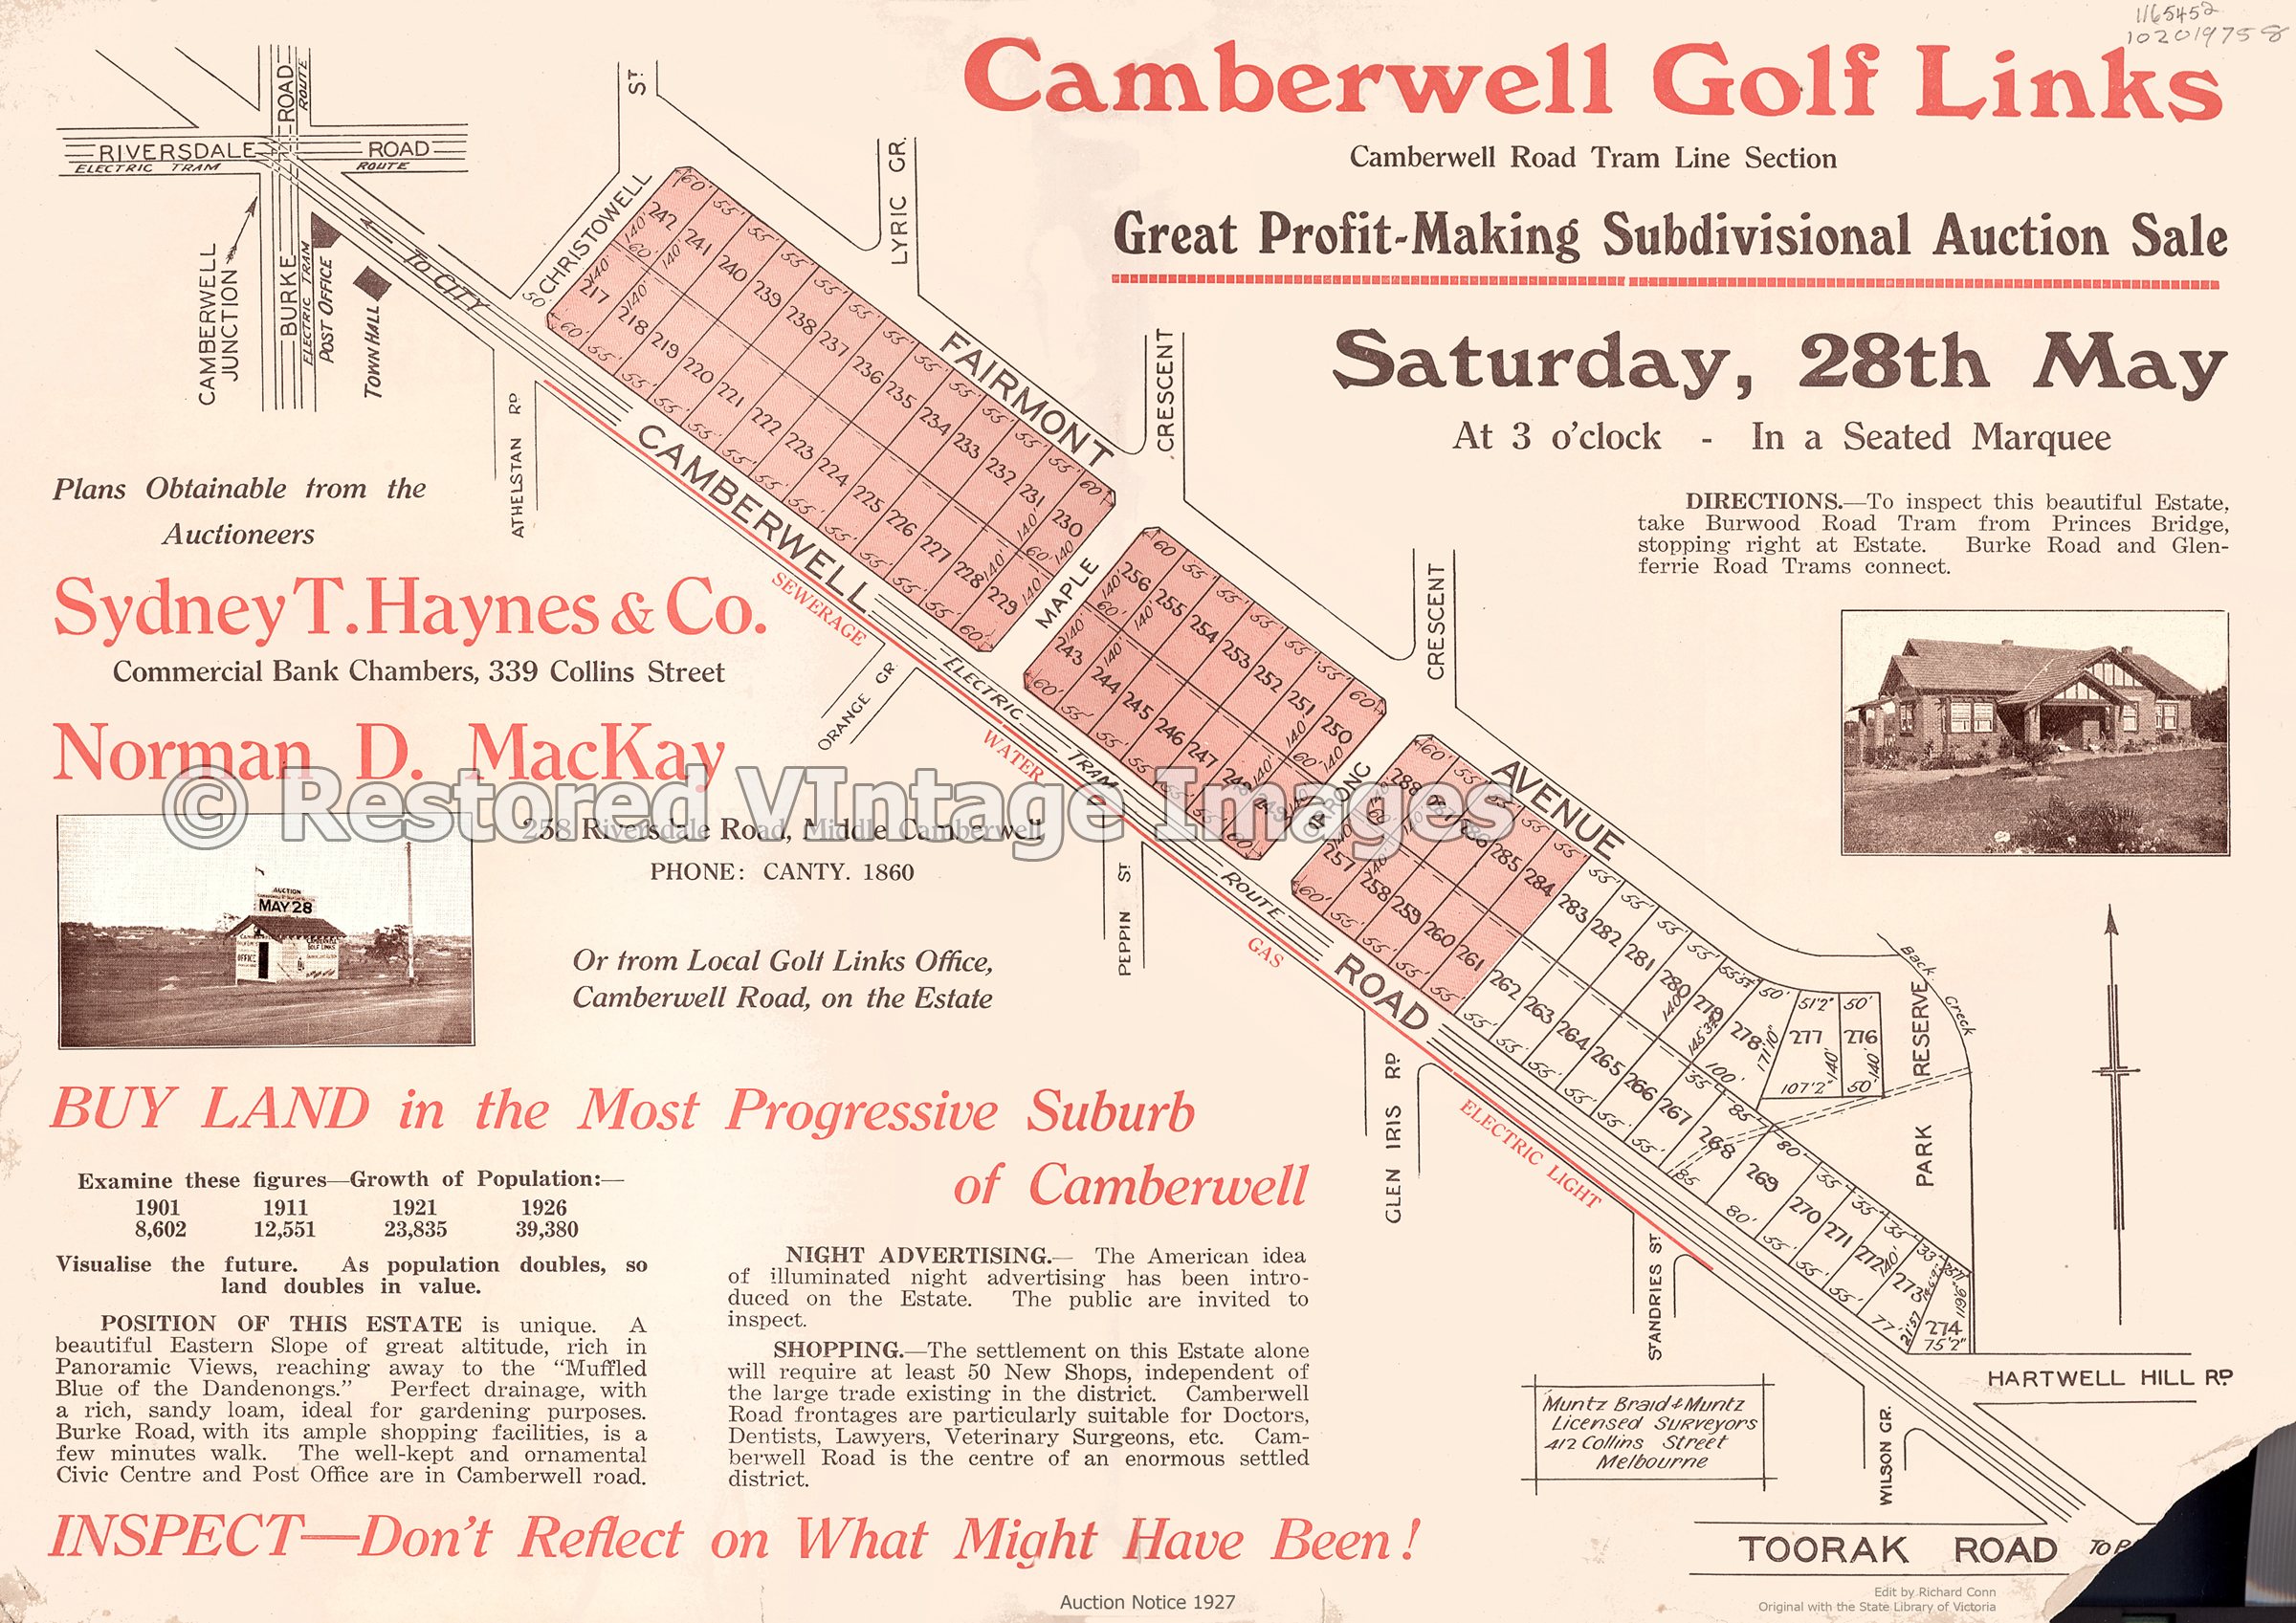 Camberwell Golf Links 28th May 1927 – Camberwell